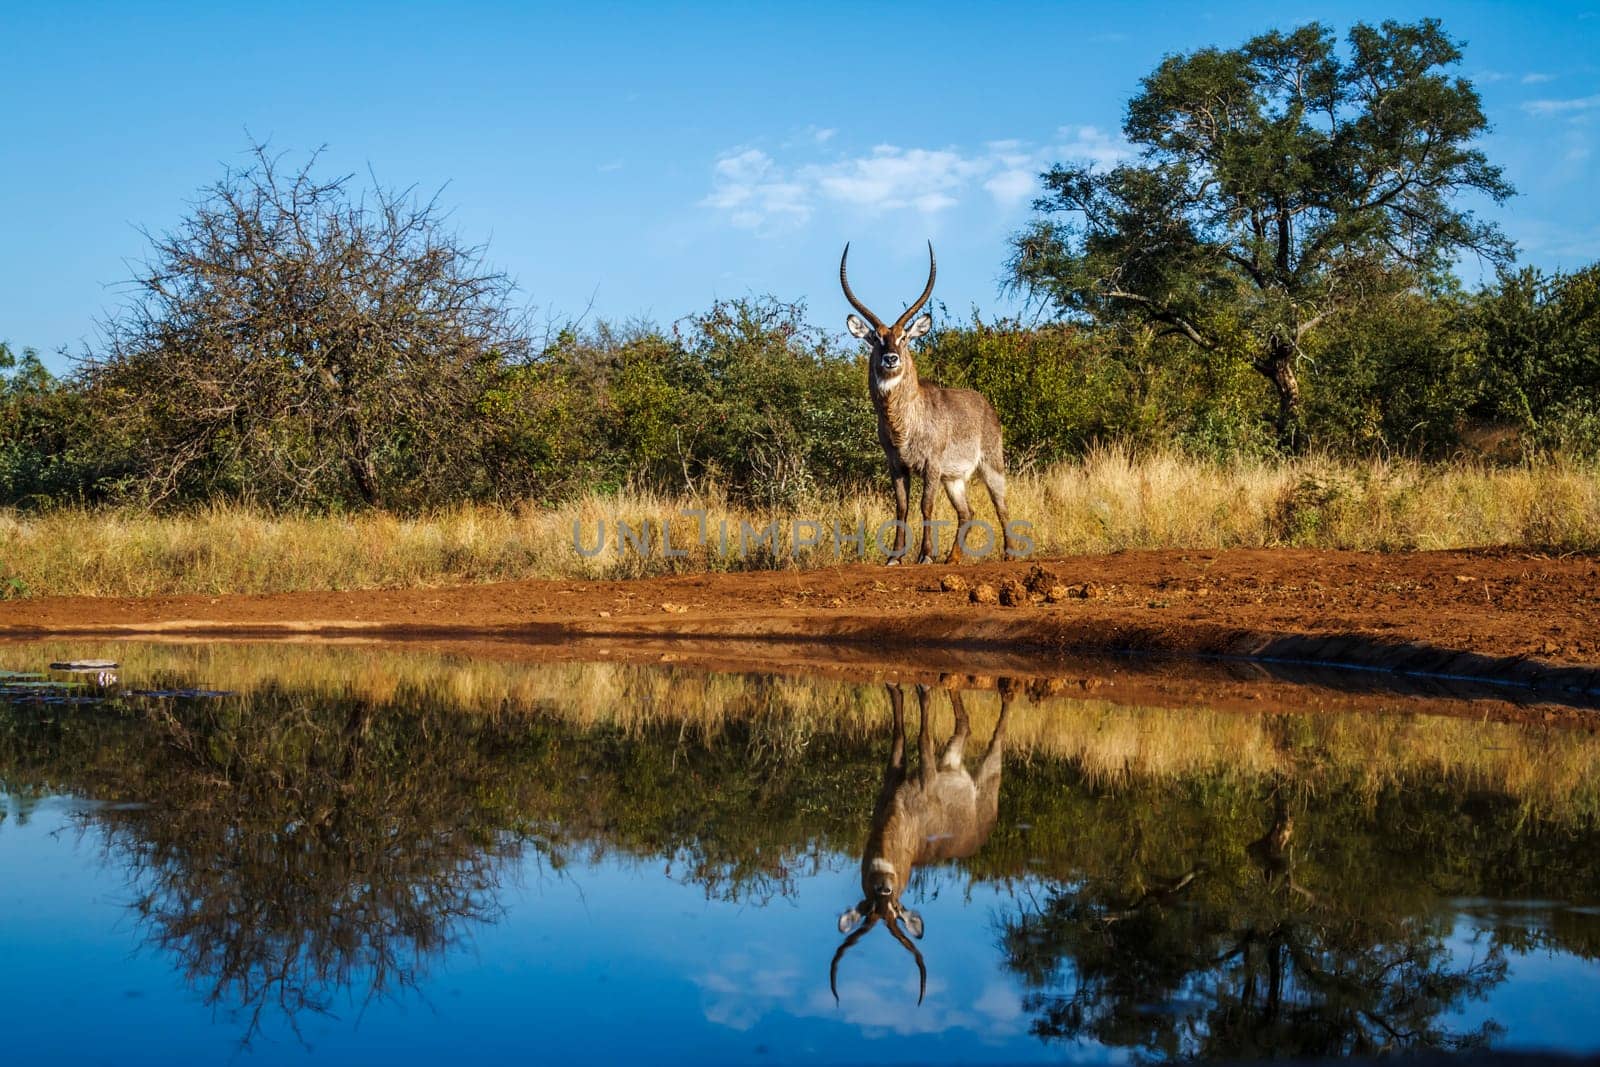 Common waterbuck in Kruger national park, South Africa by PACOCOMO